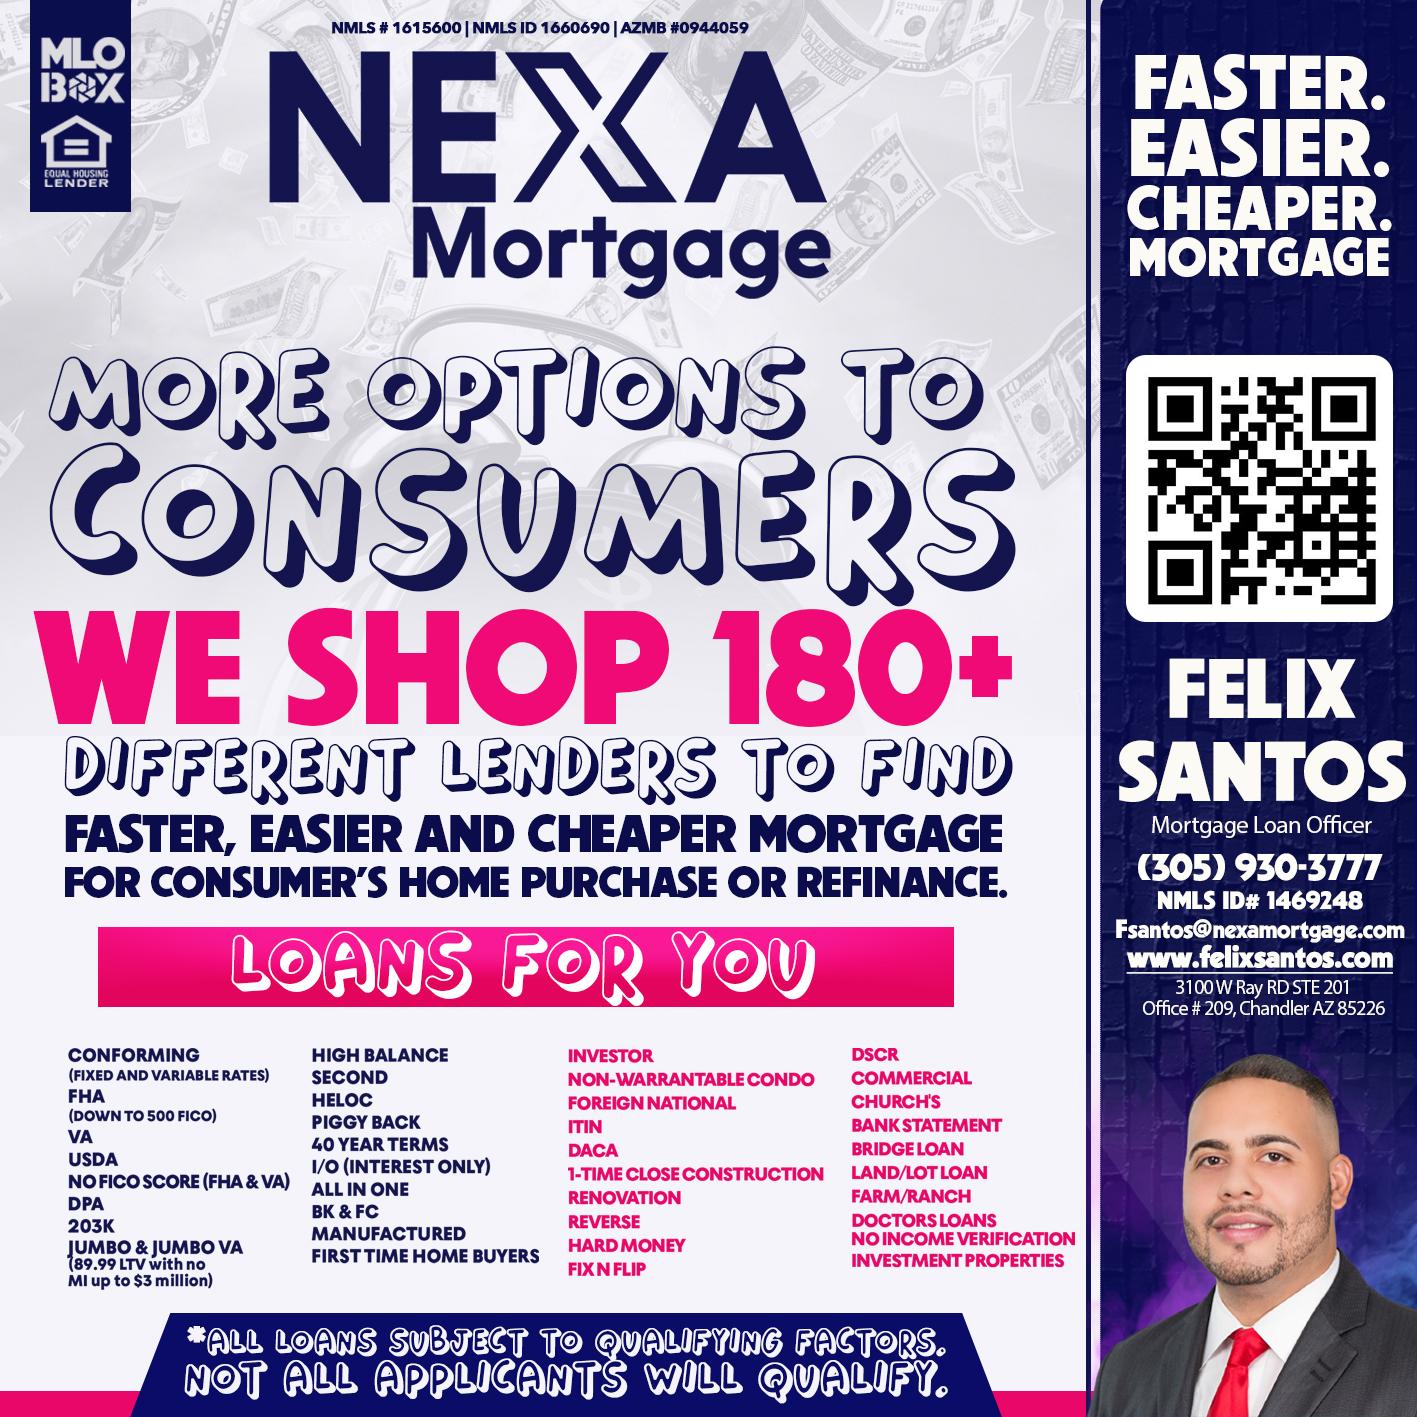 more options to consumers - Felix Santos -Mortgage Loan Officer